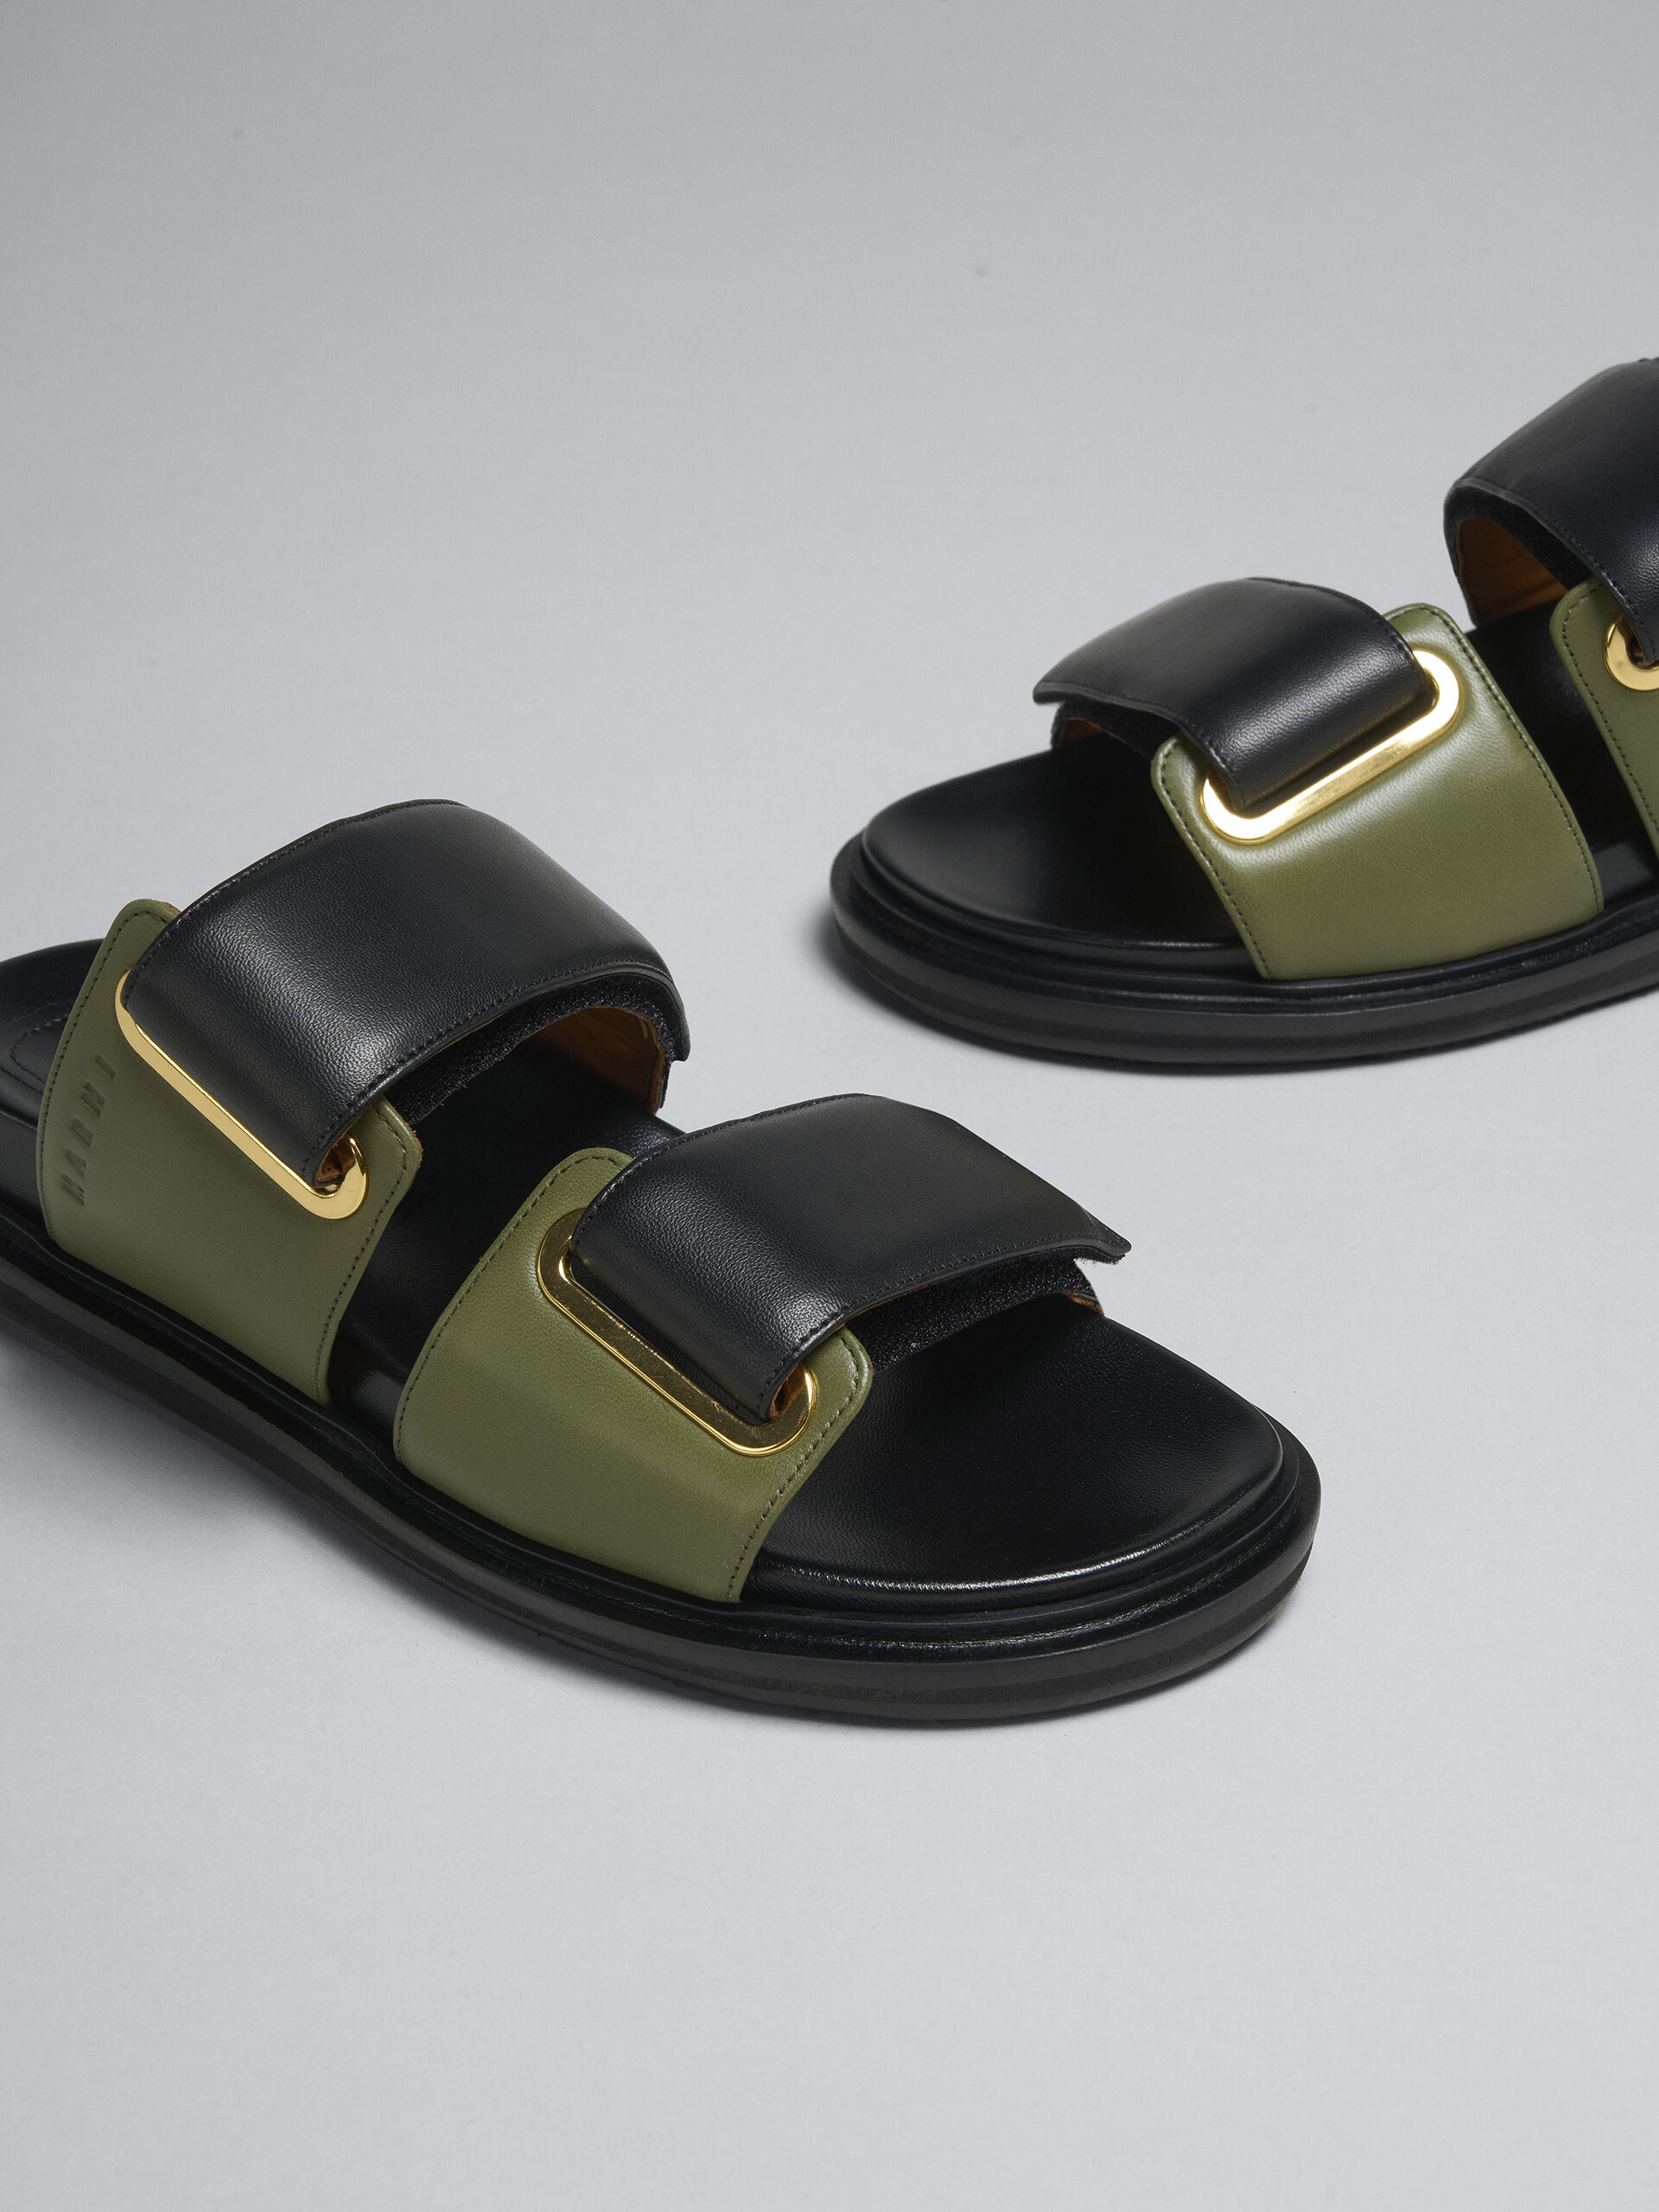 Black and green leather fussbett - Sandals - Image 5